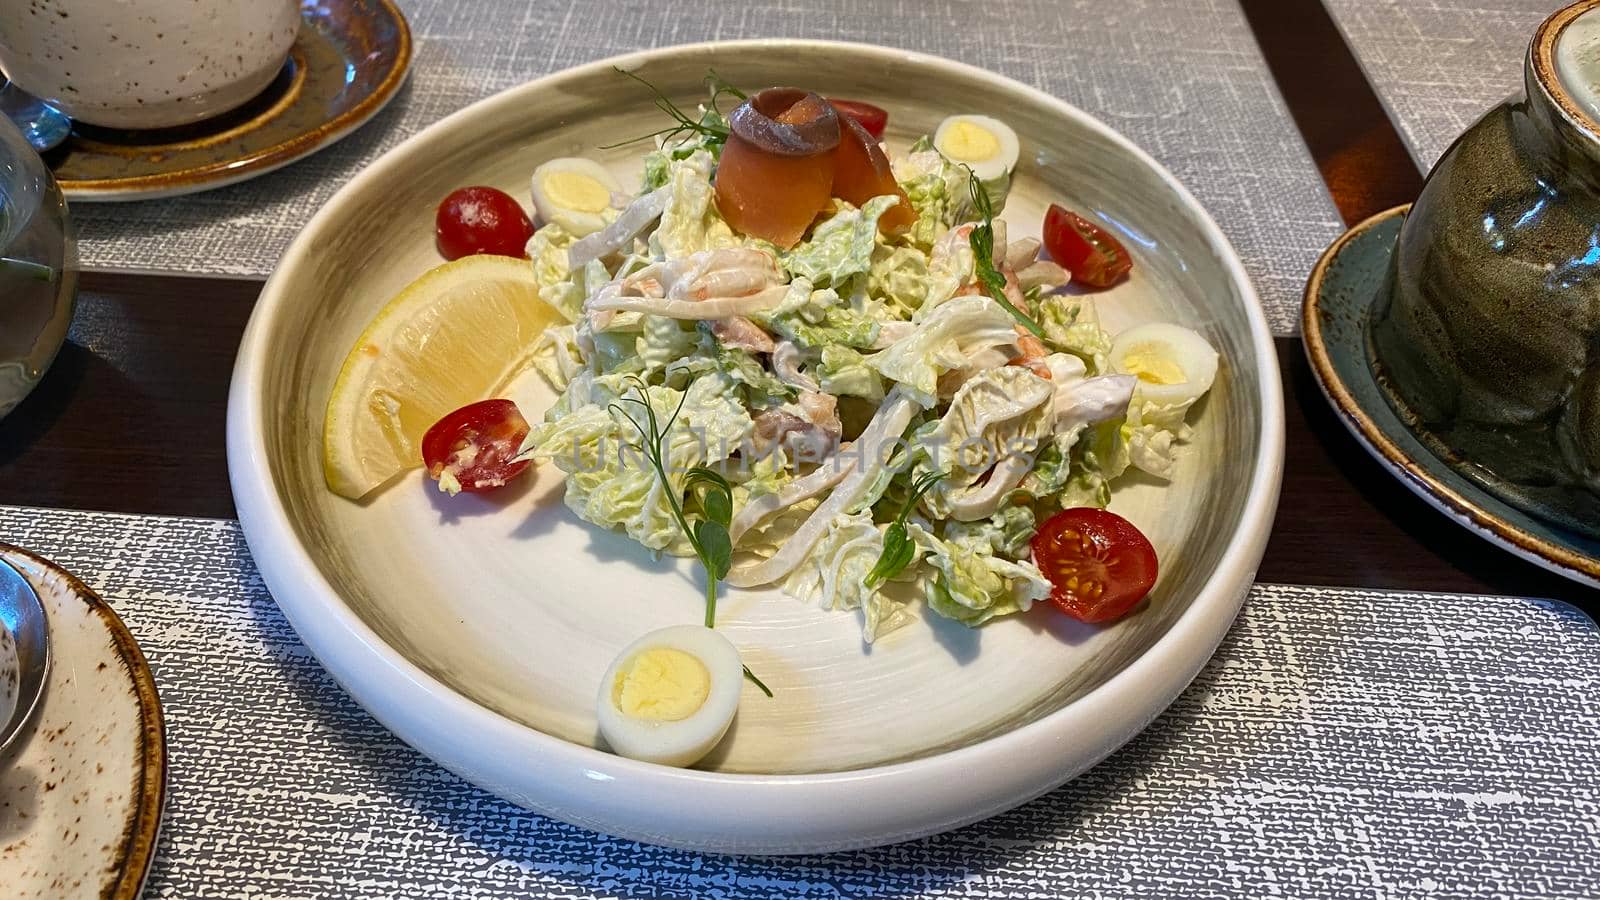 A large plate with seafood salad on the table